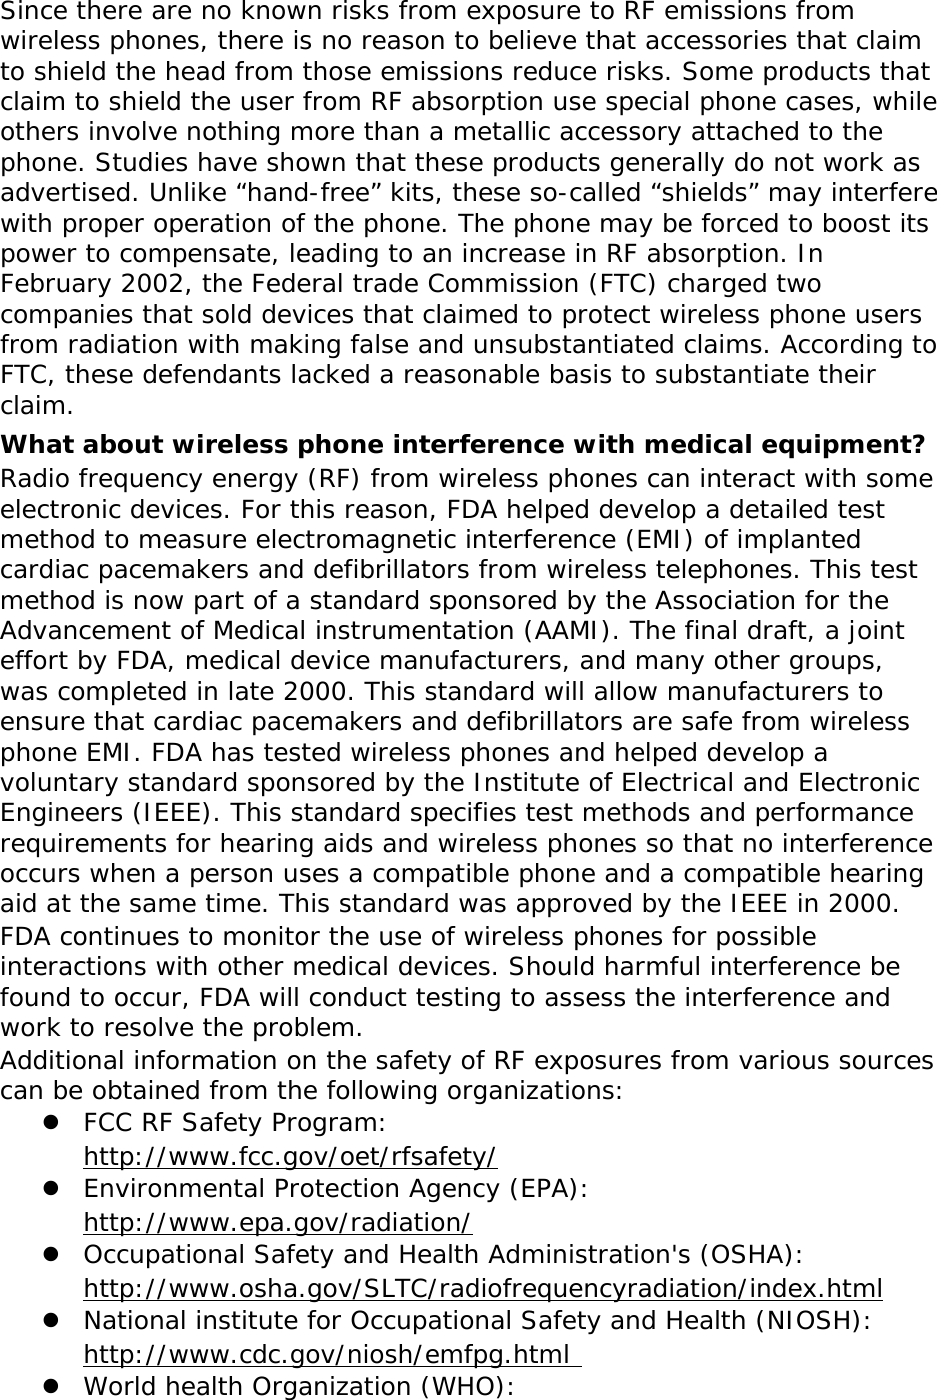 Since there are no known risks from exposure to RF emissions from wireless phones, there is no reason to believe that accessories that claim to shield the head from those emissions reduce risks. Some products that claim to shield the user from RF absorption use special phone cases, while others involve nothing more than a metallic accessory attached to the phone. Studies have shown that these products generally do not work as advertised. Unlike “hand-free” kits, these so-called “shields” may interfere with proper operation of the phone. The phone may be forced to boost its power to compensate, leading to an increase in RF absorption. In February 2002, the Federal trade Commission (FTC) charged two companies that sold devices that claimed to protect wireless phone users from radiation with making false and unsubstantiated claims. According to FTC, these defendants lacked a reasonable basis to substantiate their claim. What about wireless phone interference with medical equipment? Radio frequency energy (RF) from wireless phones can interact with some electronic devices. For this reason, FDA helped develop a detailed test method to measure electromagnetic interference (EMI) of implanted cardiac pacemakers and defibrillators from wireless telephones. This test method is now part of a standard sponsored by the Association for the Advancement of Medical instrumentation (AAMI). The final draft, a joint effort by FDA, medical device manufacturers, and many other groups, was completed in late 2000. This standard will allow manufacturers to ensure that cardiac pacemakers and defibrillators are safe from wireless phone EMI. FDA has tested wireless phones and helped develop a voluntary standard sponsored by the Institute of Electrical and Electronic Engineers (IEEE). This standard specifies test methods and performance requirements for hearing aids and wireless phones so that no interference occurs when a person uses a compatible phone and a compatible hearing aid at the same time. This standard was approved by the IEEE in 2000. FDA continues to monitor the use of wireless phones for possible interactions with other medical devices. Should harmful interference be found to occur, FDA will conduct testing to assess the interference and work to resolve the problem. Additional information on the safety of RF exposures from various sources can be obtained from the following organizations: z FCC RF Safety Program:  http://www.fcc.gov/oet/rfsafety/ z Environmental Protection Agency (EPA):  http://www.epa.gov/radiation/ z Occupational Safety and Health Administration&apos;s (OSHA):        http://www.osha.gov/SLTC/radiofrequencyradiation/index.html z National institute for Occupational Safety and Health (NIOSH):  http://www.cdc.gov/niosh/emfpg.html  z World health Organization (WHO): 